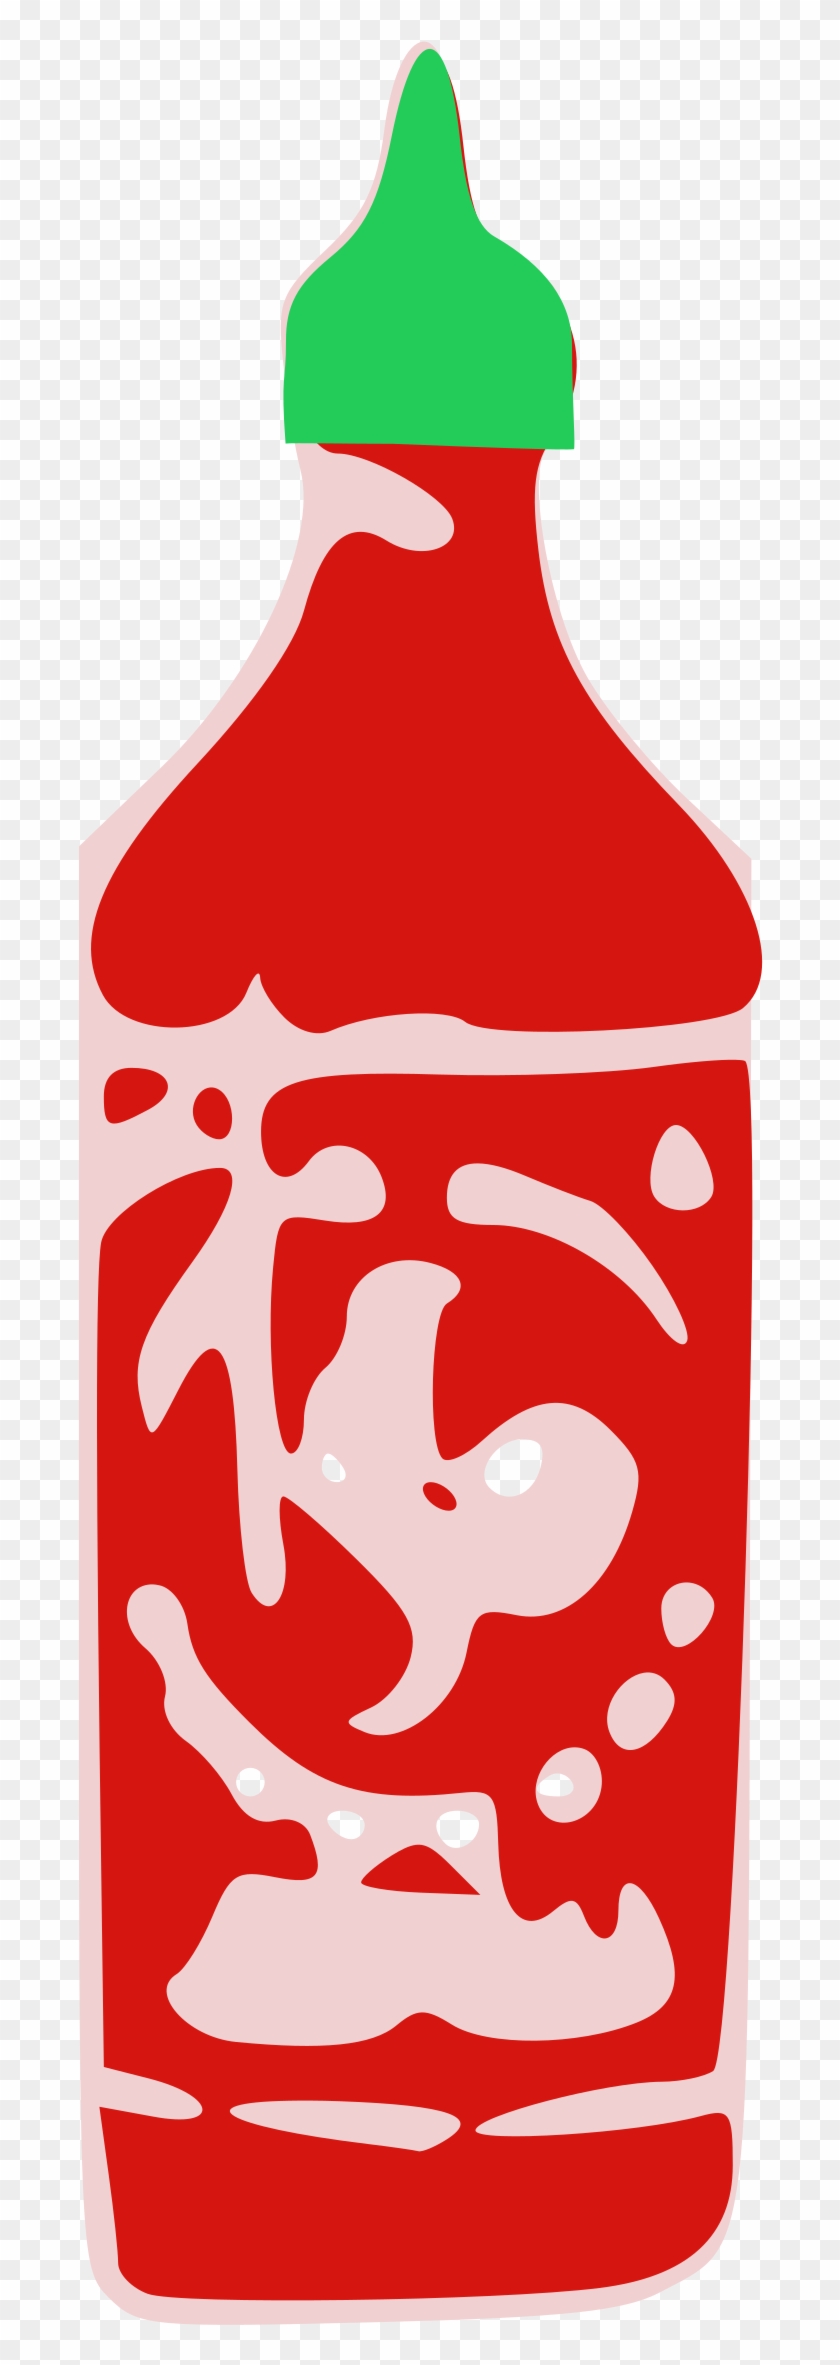 This Free Icons Png Design Of Hot Sauce Clipart